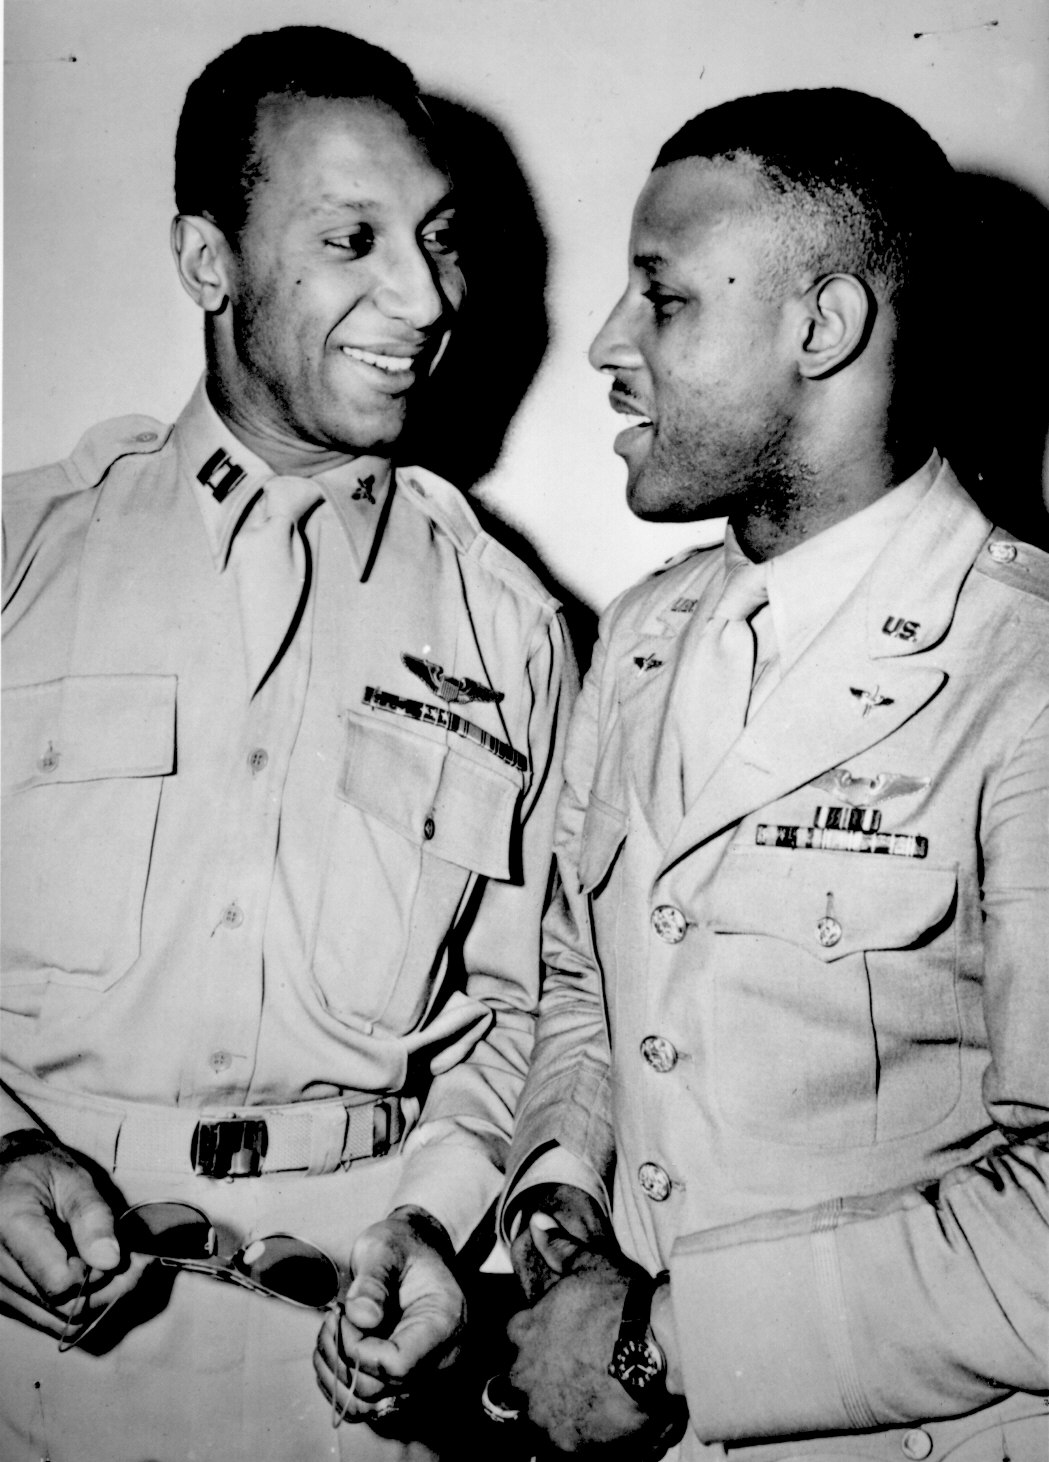 Pictures of African Americans During World War II